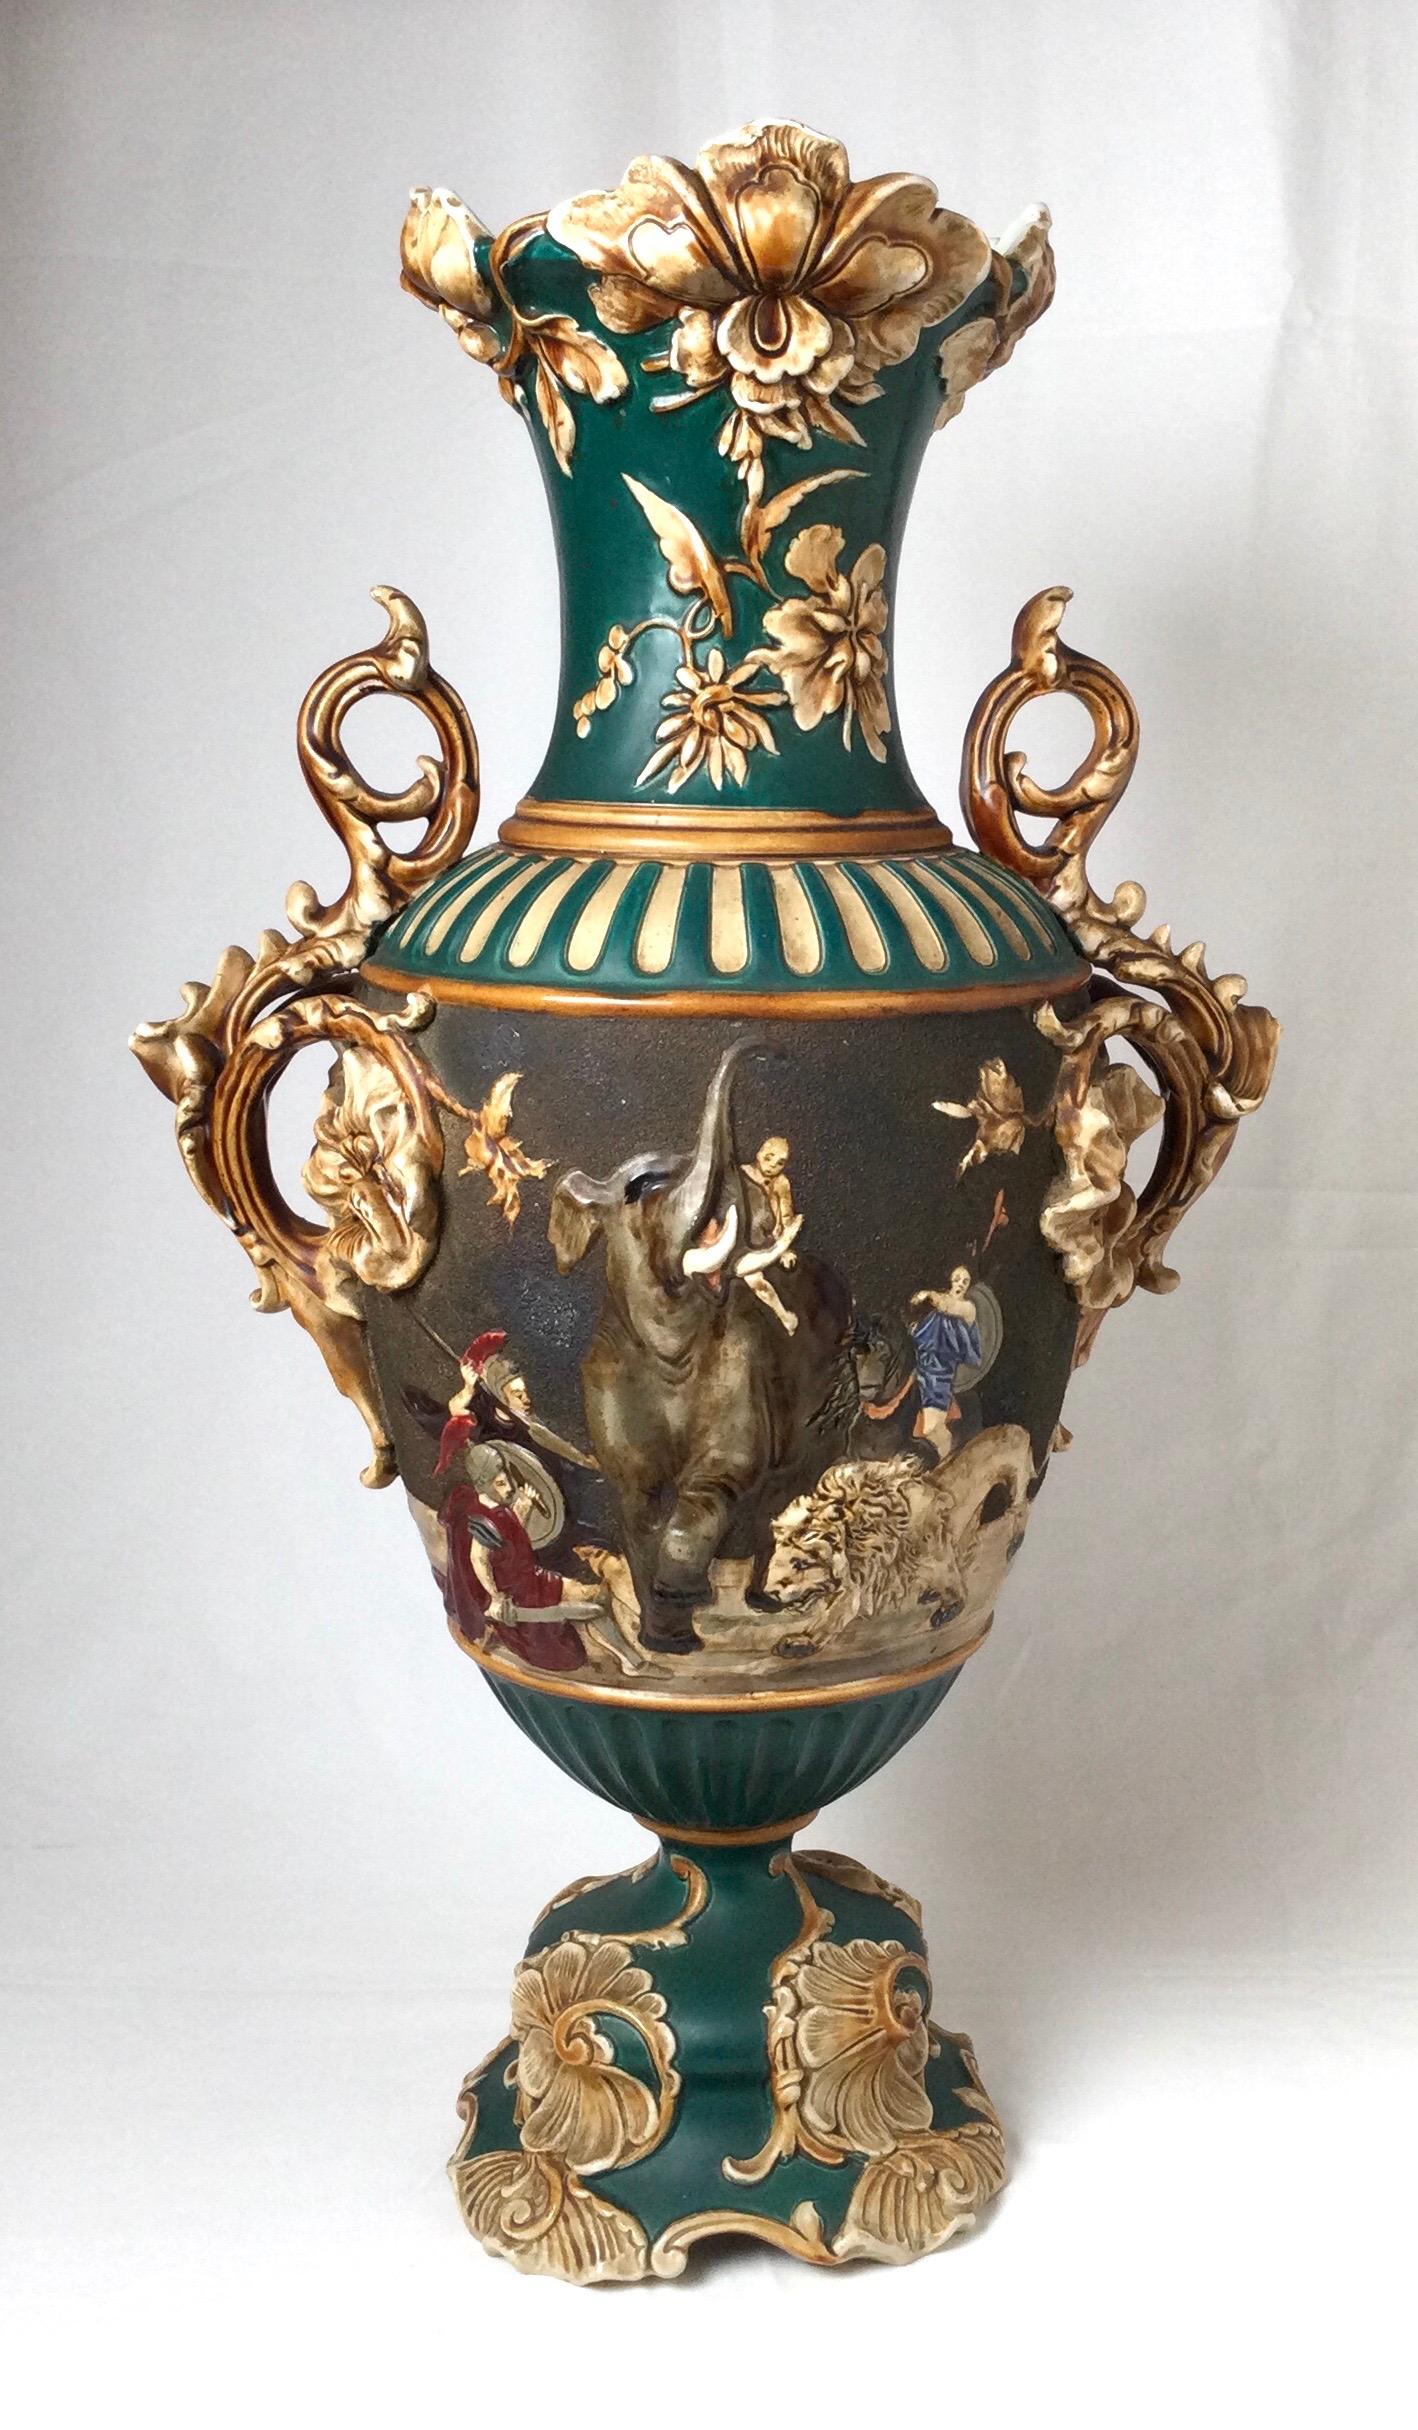 Bohemian Amphora large vase by Wilhelm Shiller and Sons featuring lions, elephants, soldiers with floral accents in vibrant colors. Marked WSS.